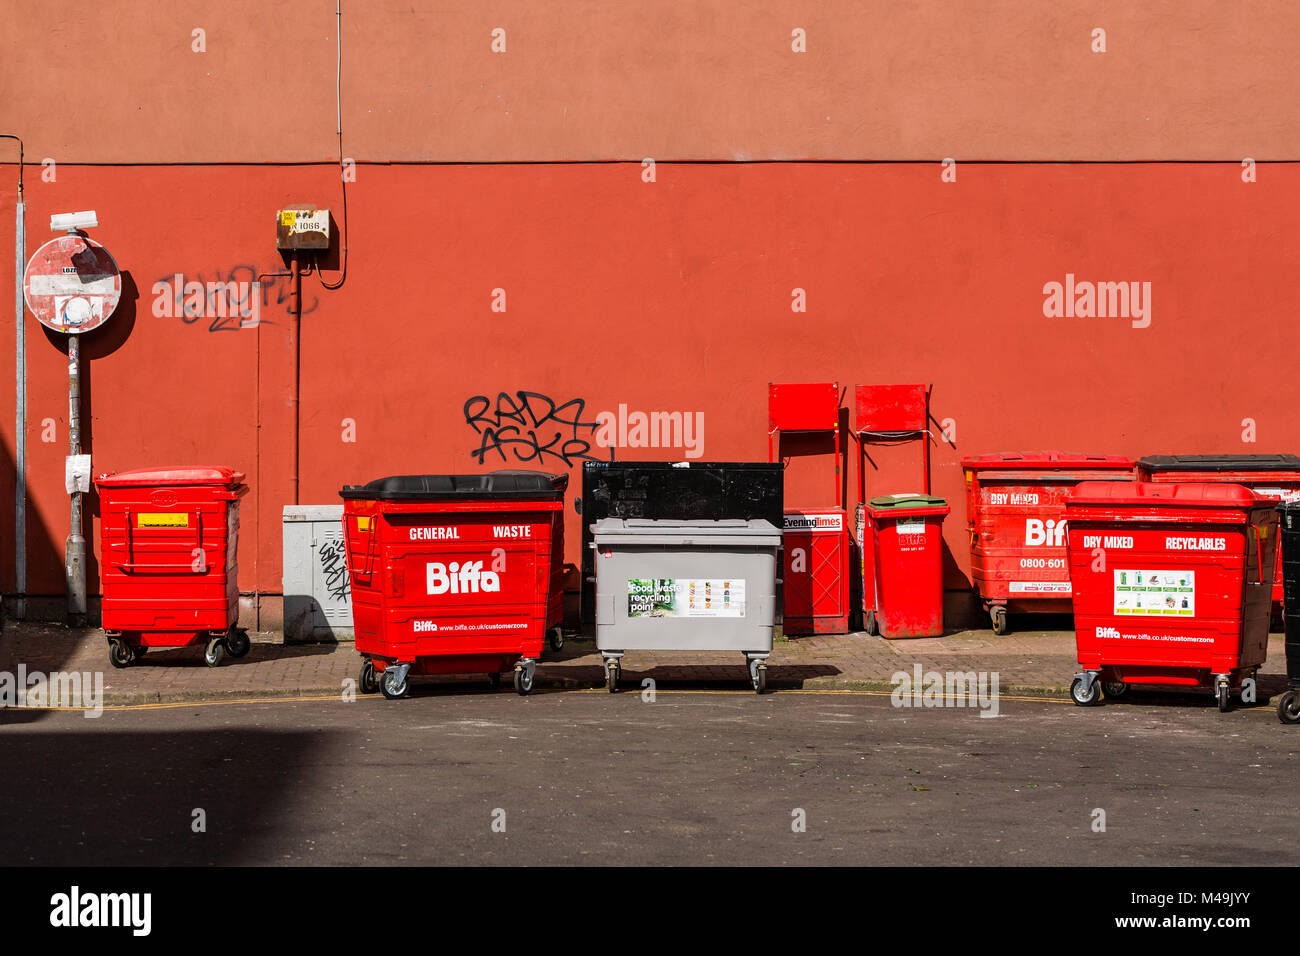 Commercial rubbish bins on a UK city street Stock Photo